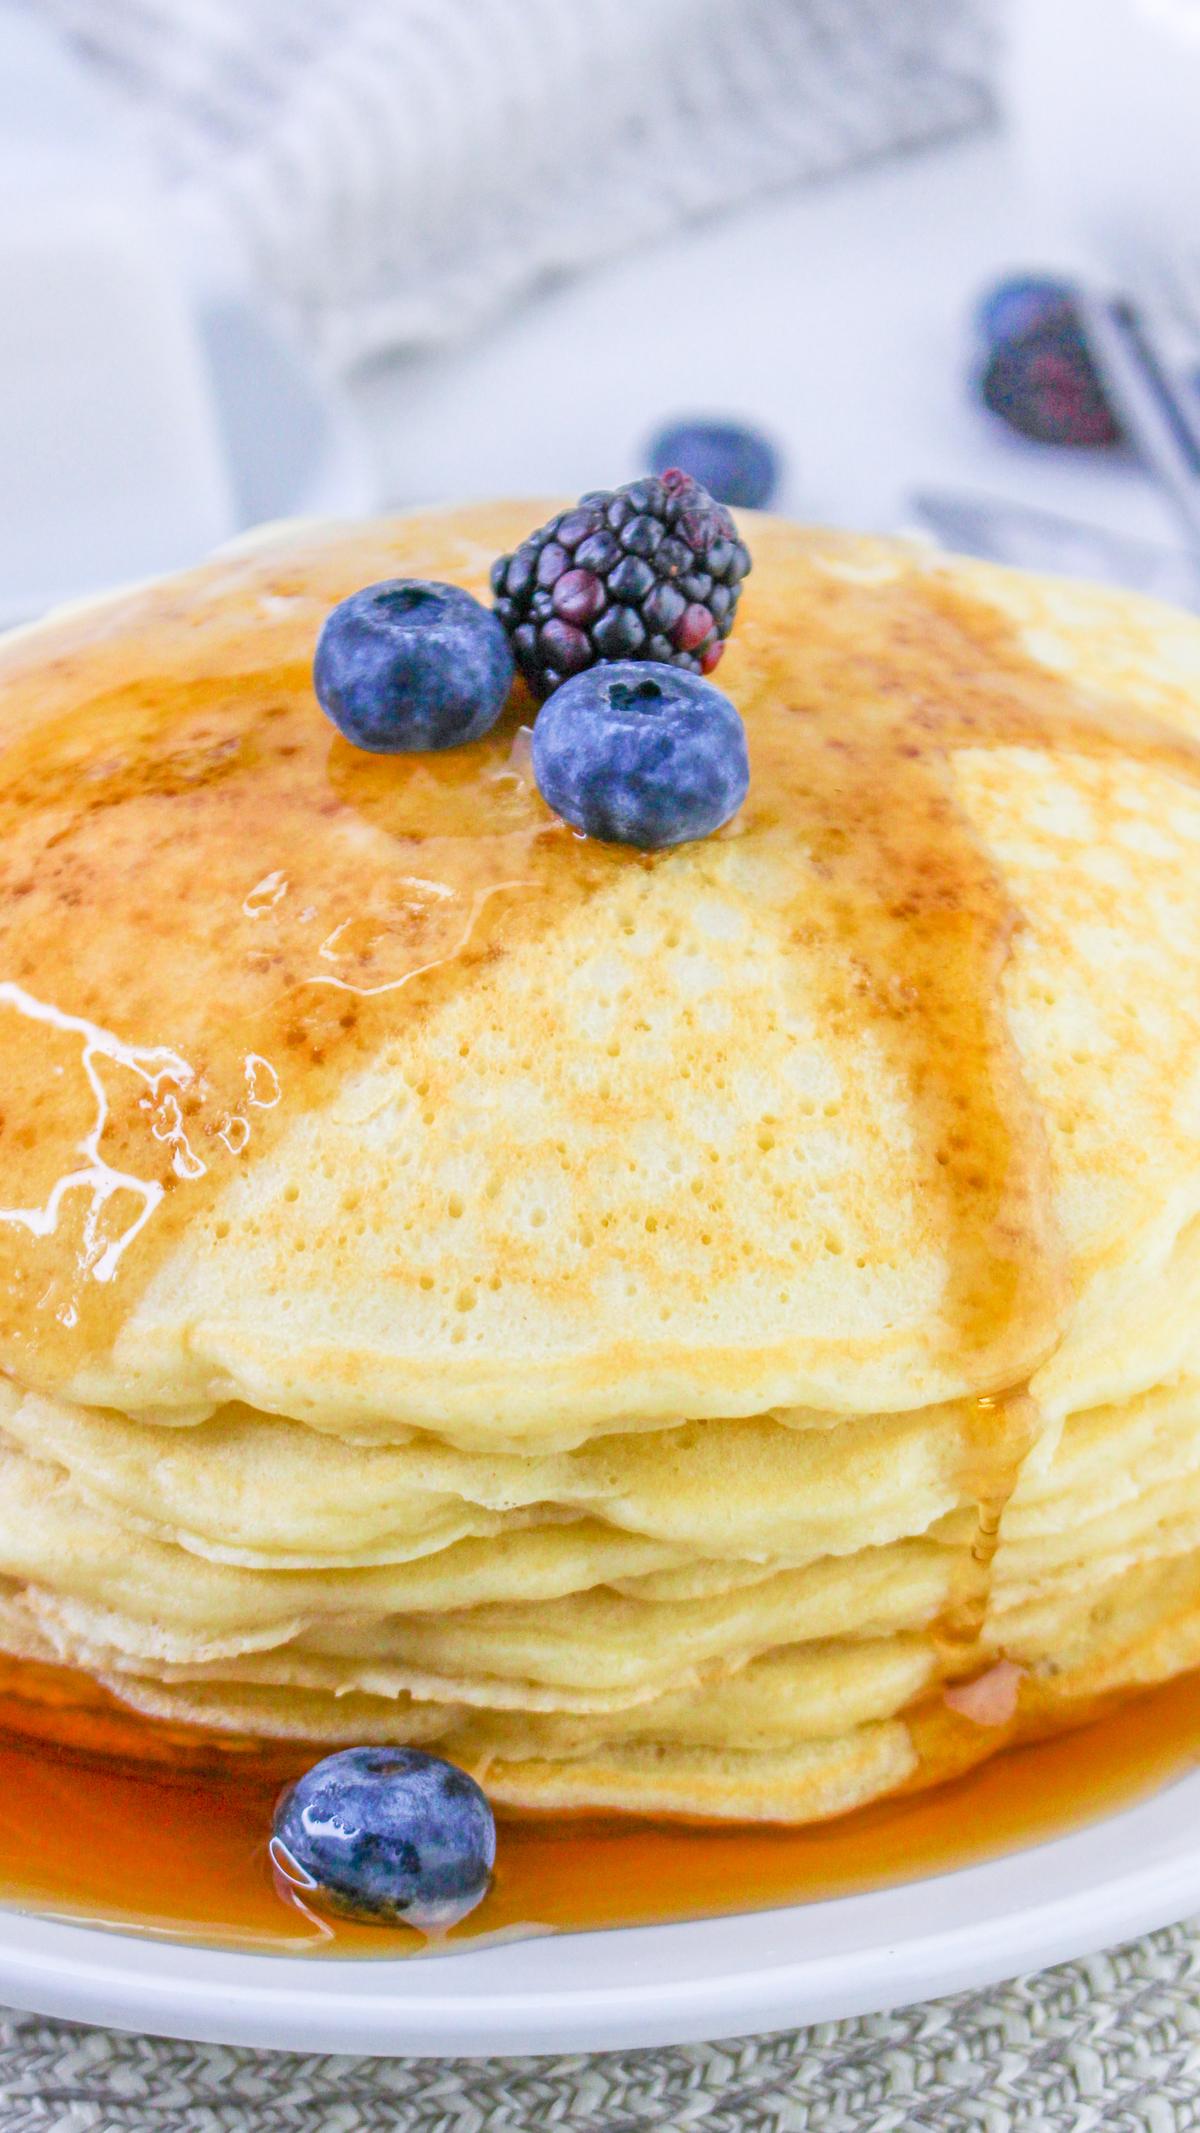 Stack of sweet cream pancakes on a plate with a few berries on top and covered in syrup.